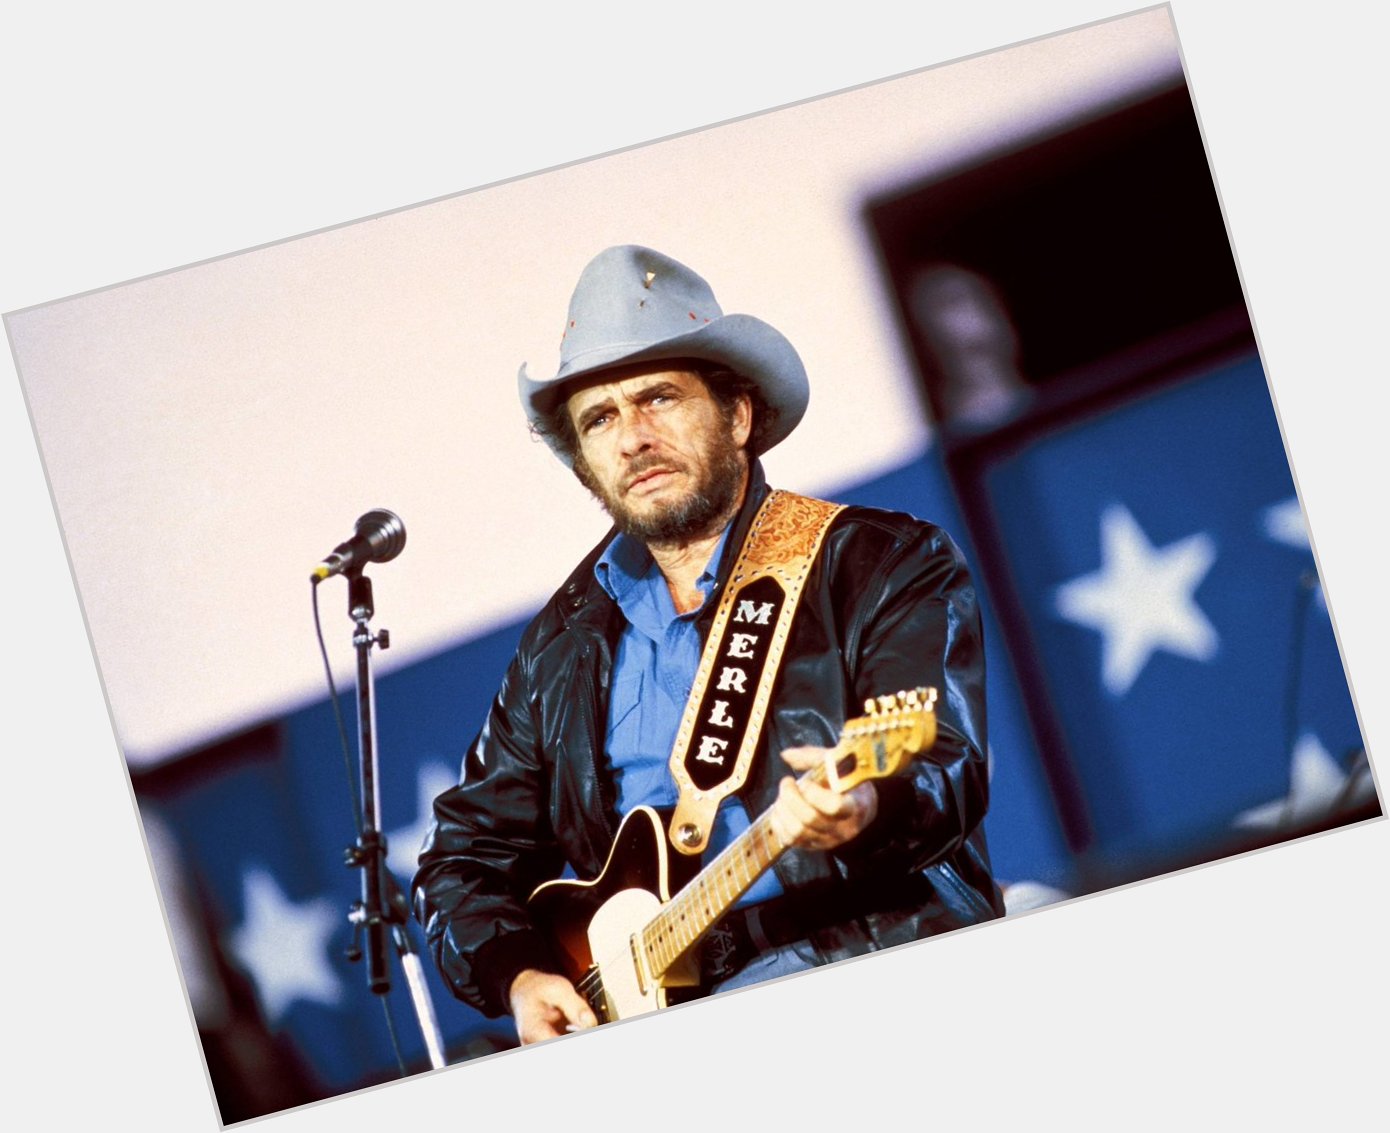 Merle Haggard  was born on this day, April 6, 1937  and he died on this day, April 6, 2016. 
Happy Birthday/RIP 